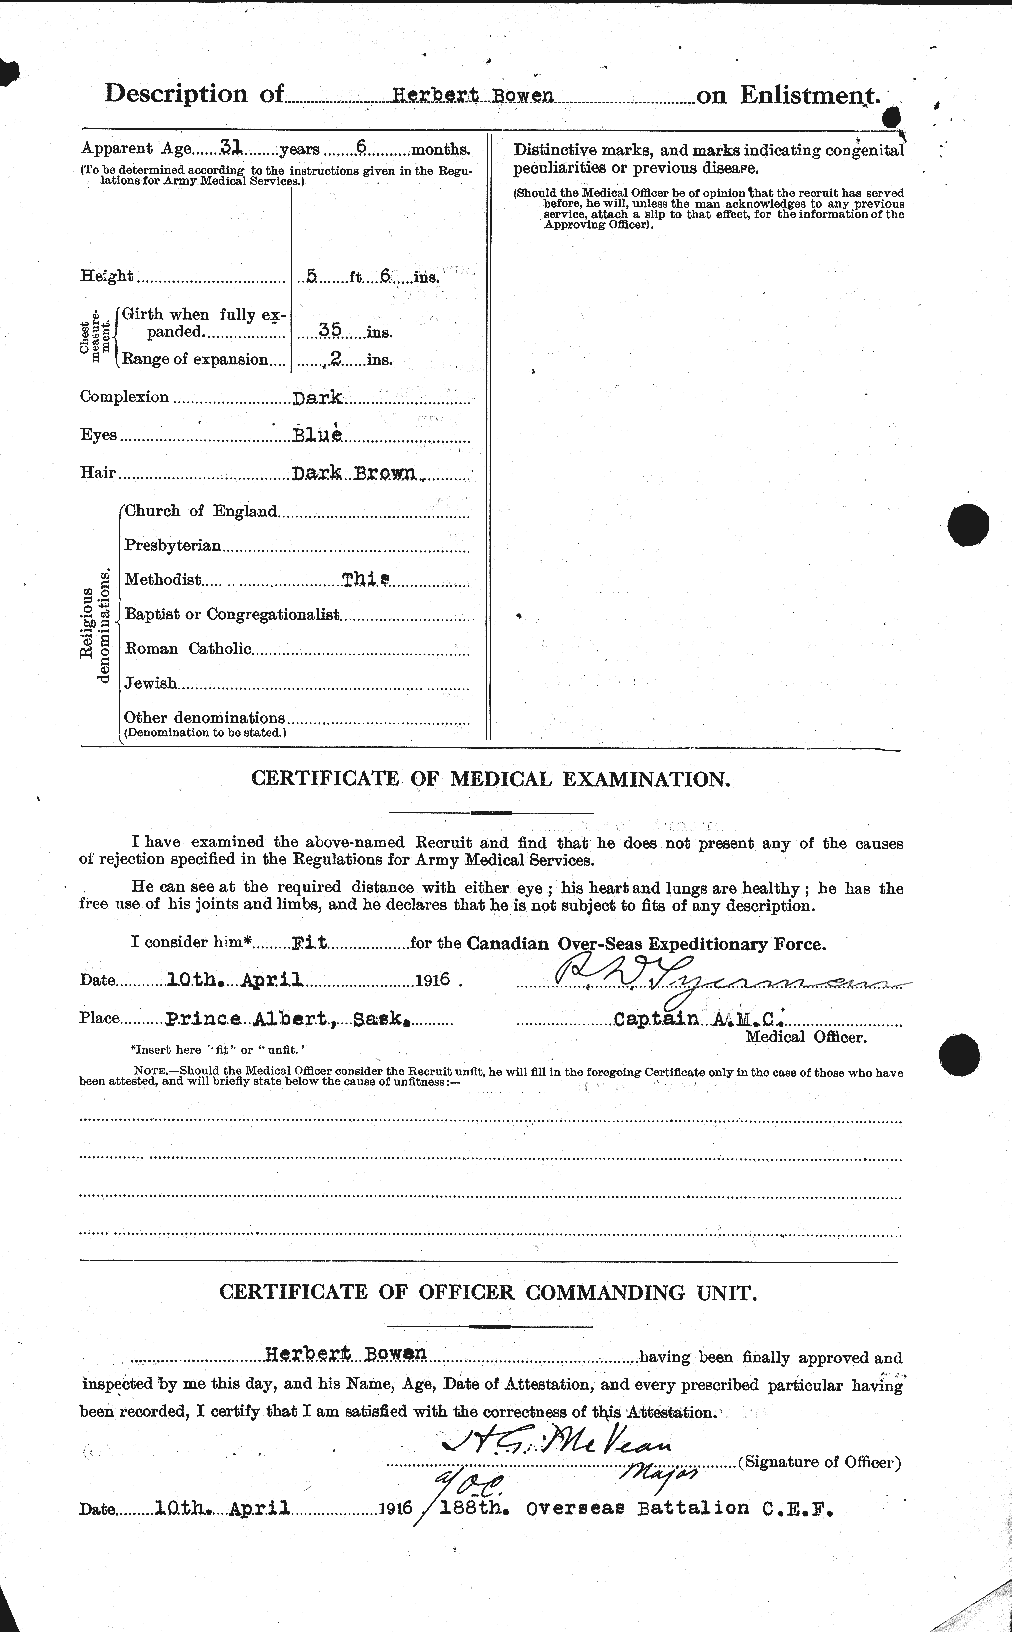 Personnel Records of the First World War - CEF 255417b